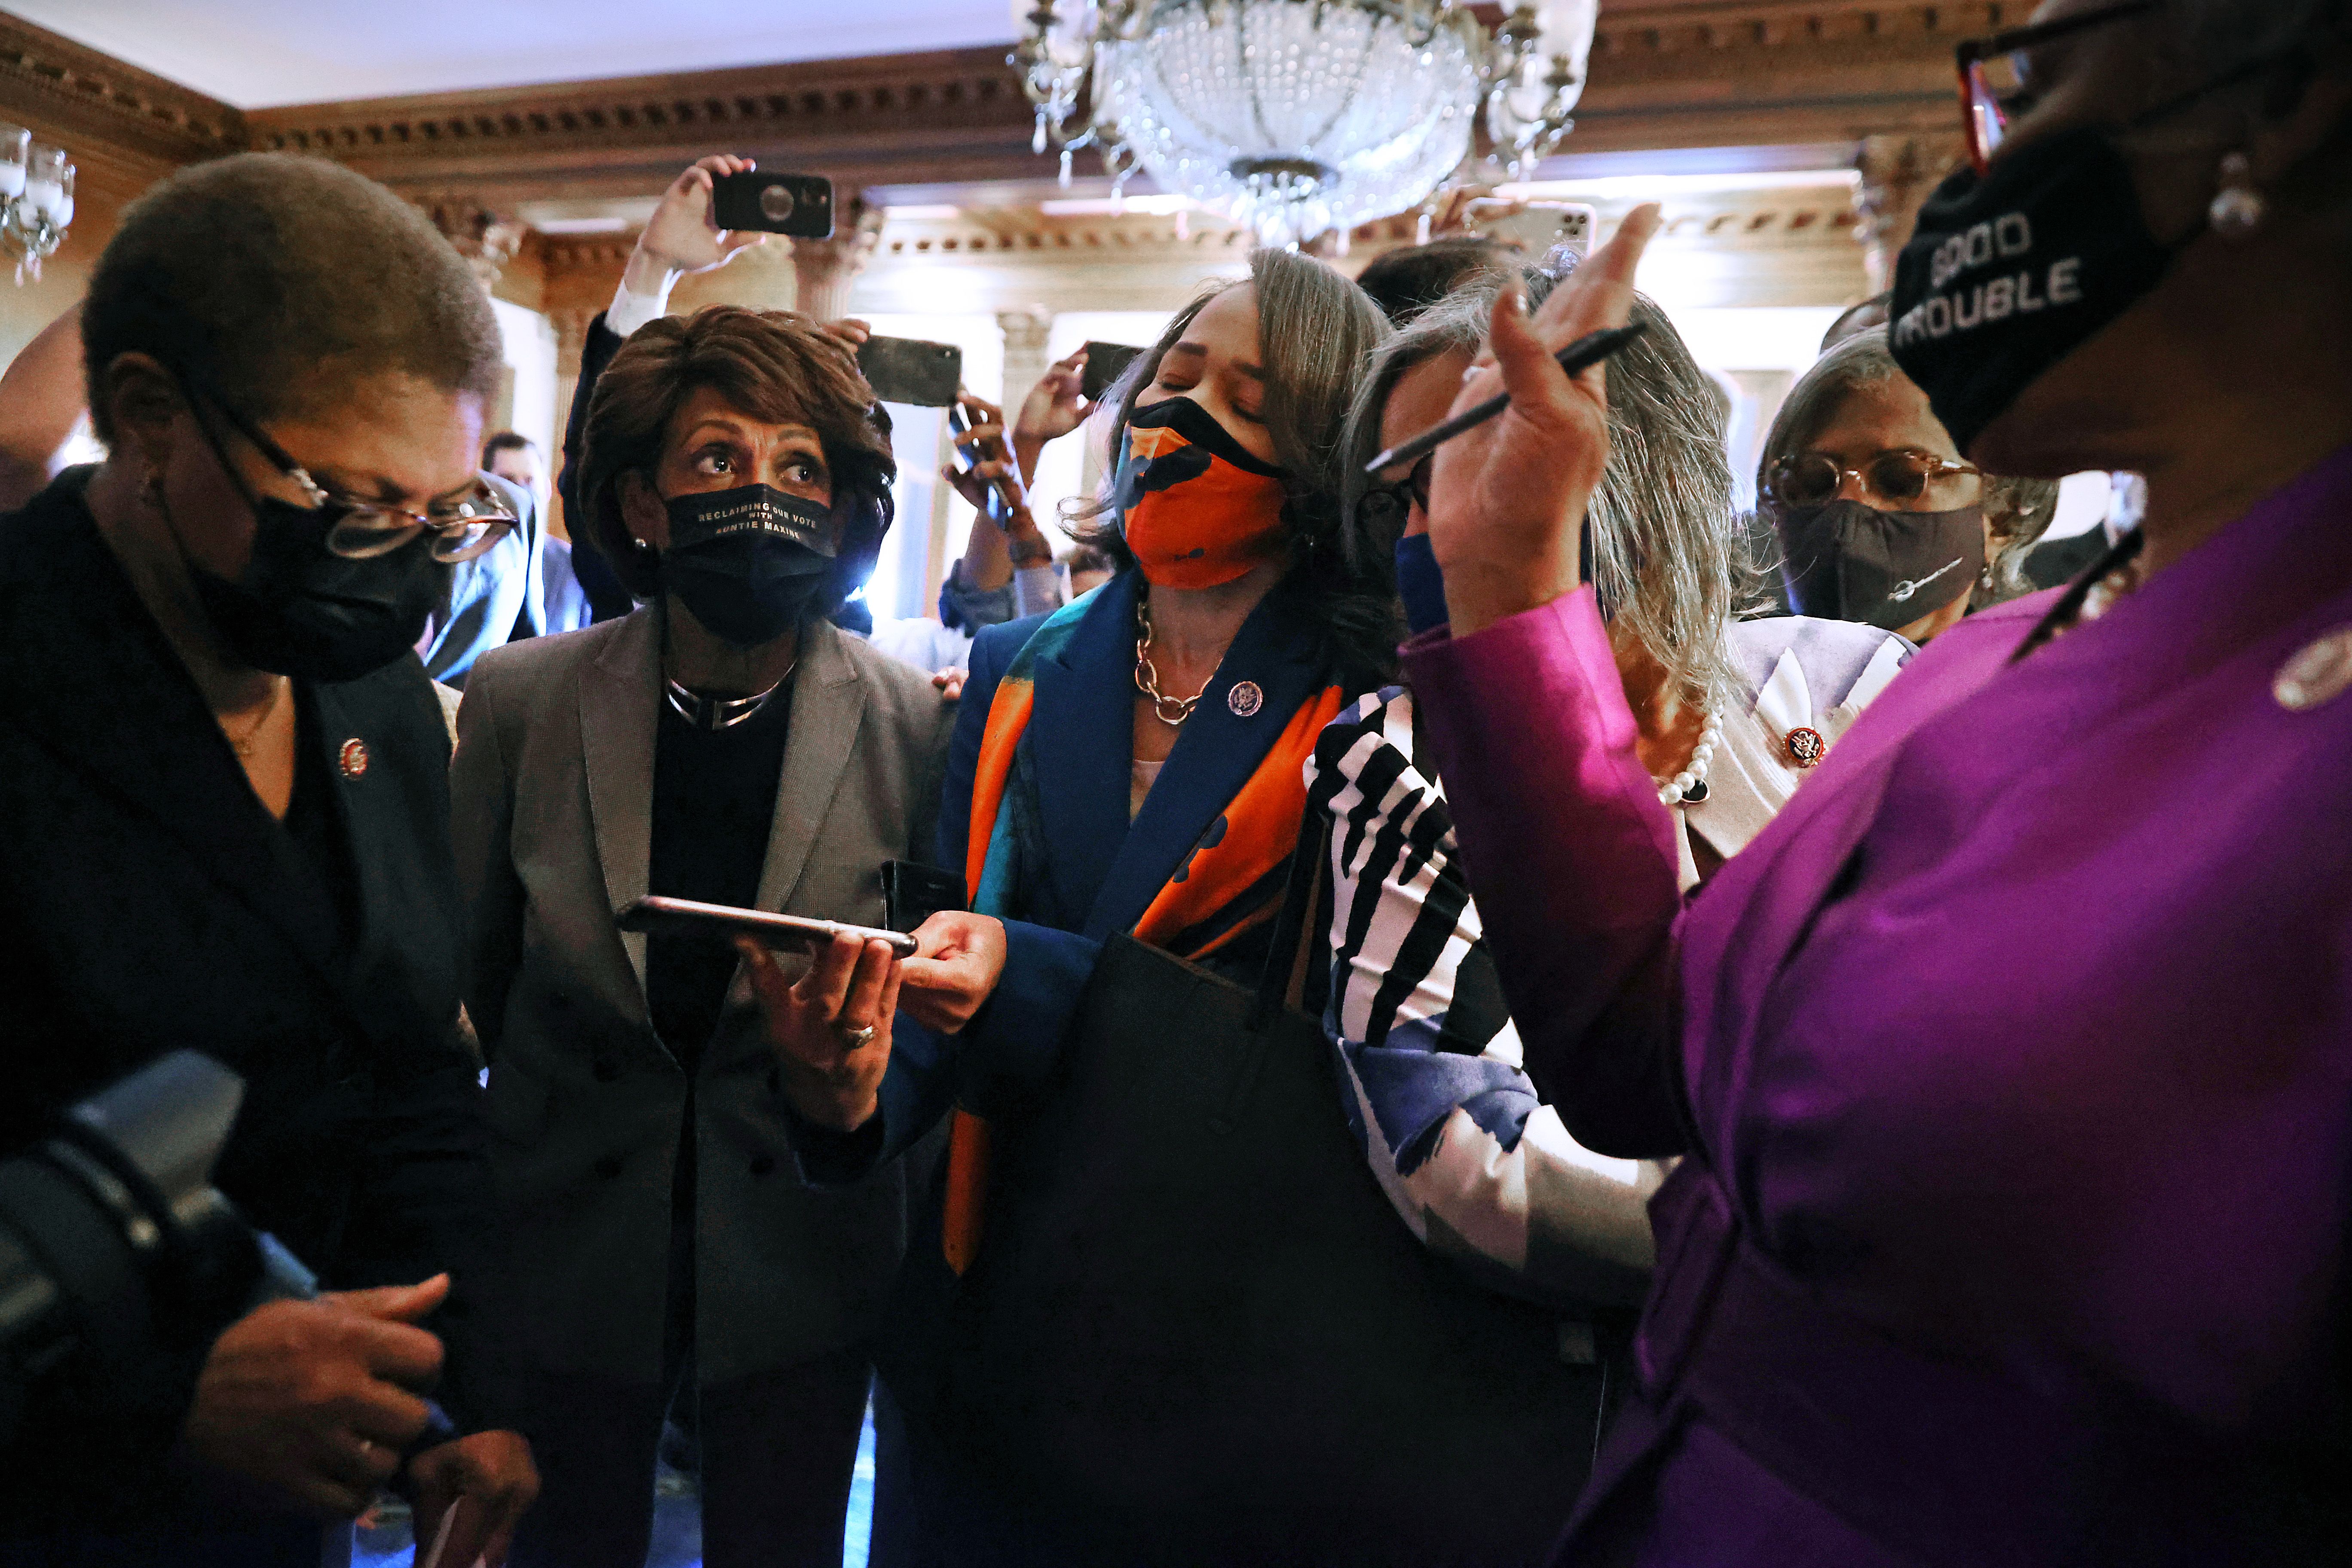 Members of the Congressional Black Caucus, including Rep. Karen Bass, Rep. Maxine Waters, Rep. Lisa Blunt Rochester , and Rep. Joyce Beatty react to the verdict in the Chauvin trial